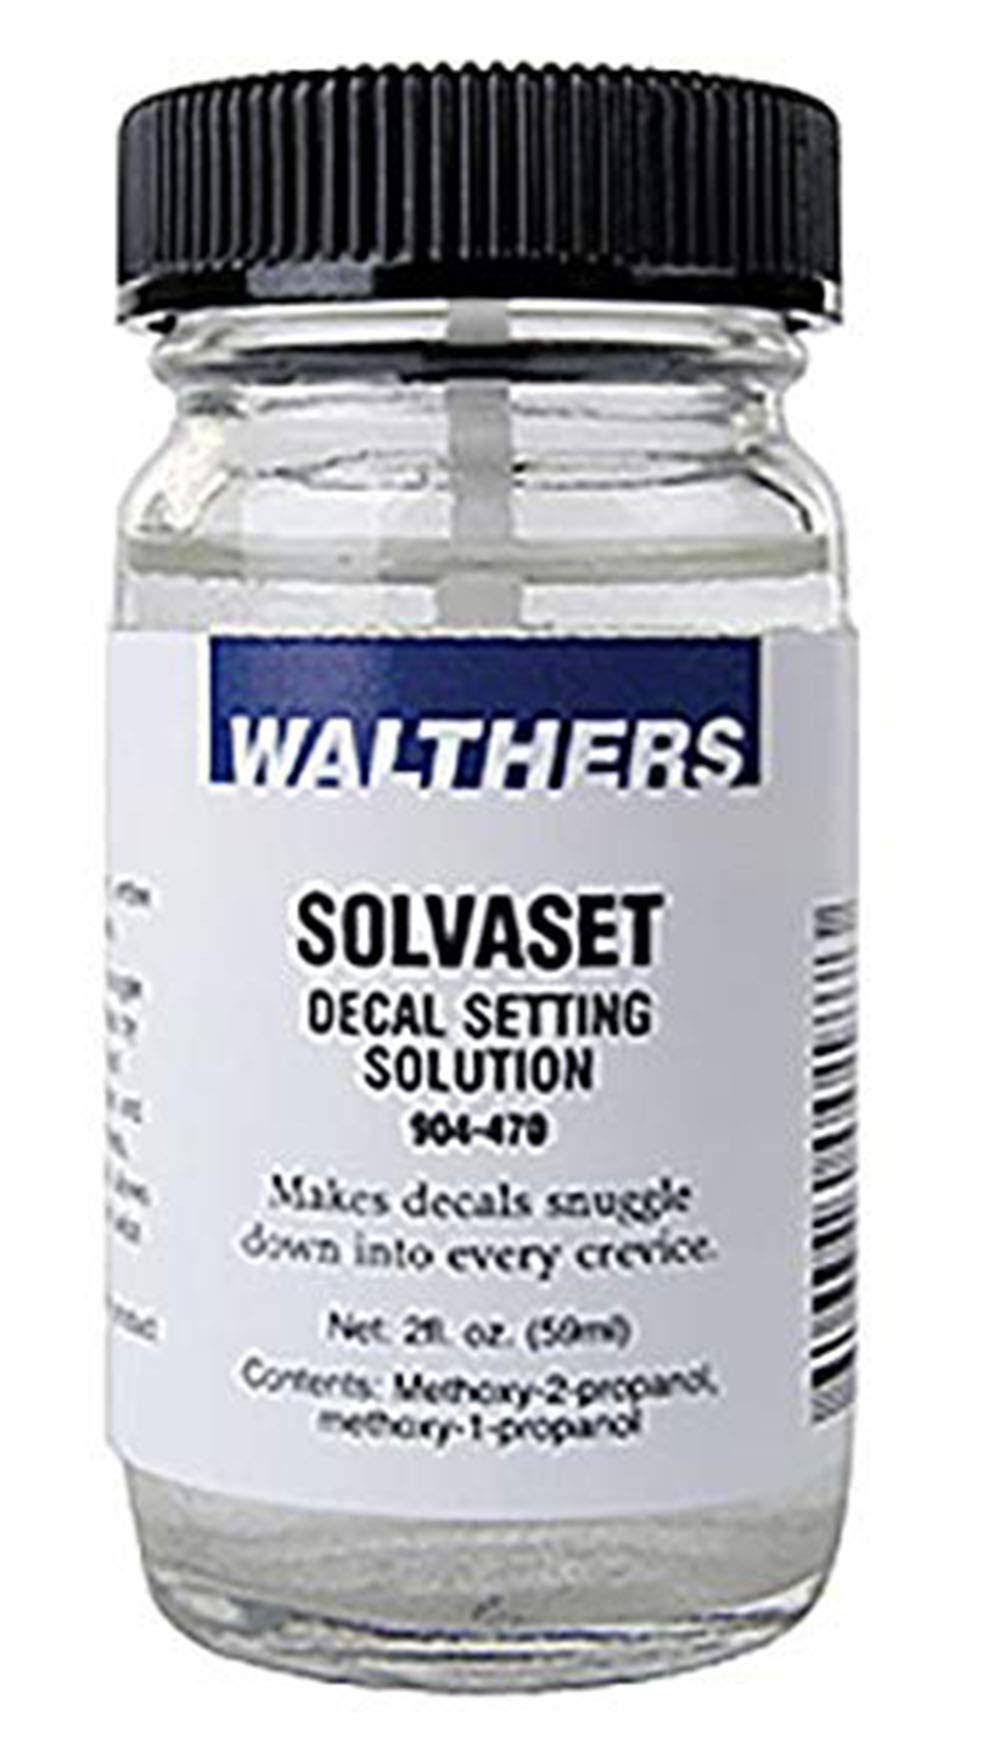 Walthers Solvaset Decal Setting Solvent Solution - 2oz